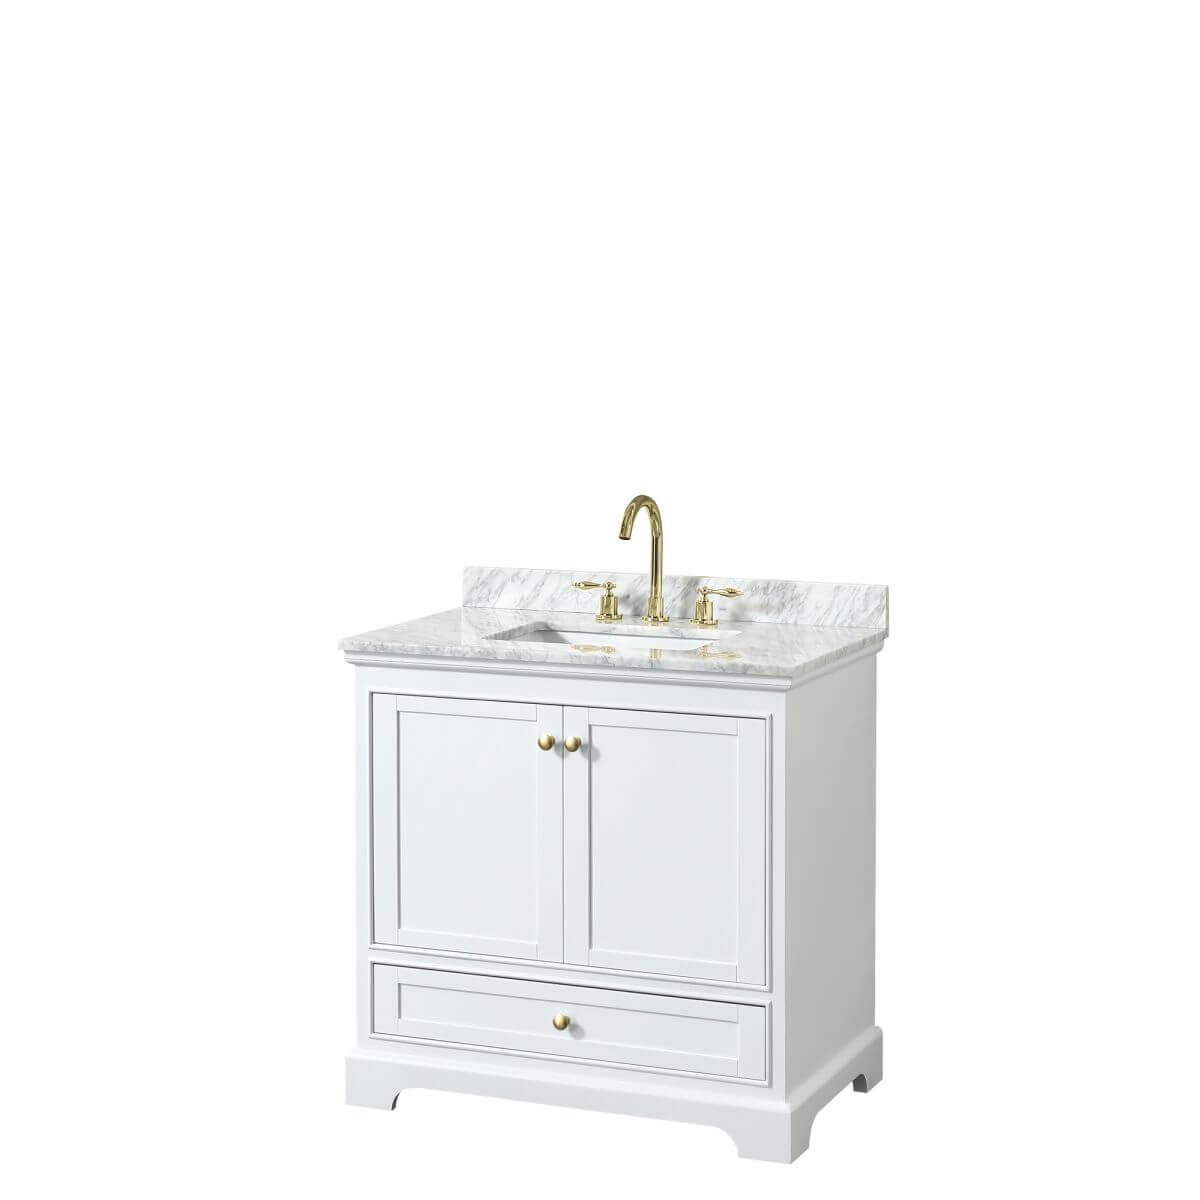 Wyndham Collection Deborah 36 inch Single Bathroom Vanity in White with White Carrara Marble Countertop, Undermount Square Sink, Brushed Gold Trim and No Mirror - WCS202036SWGCMUNSMXX